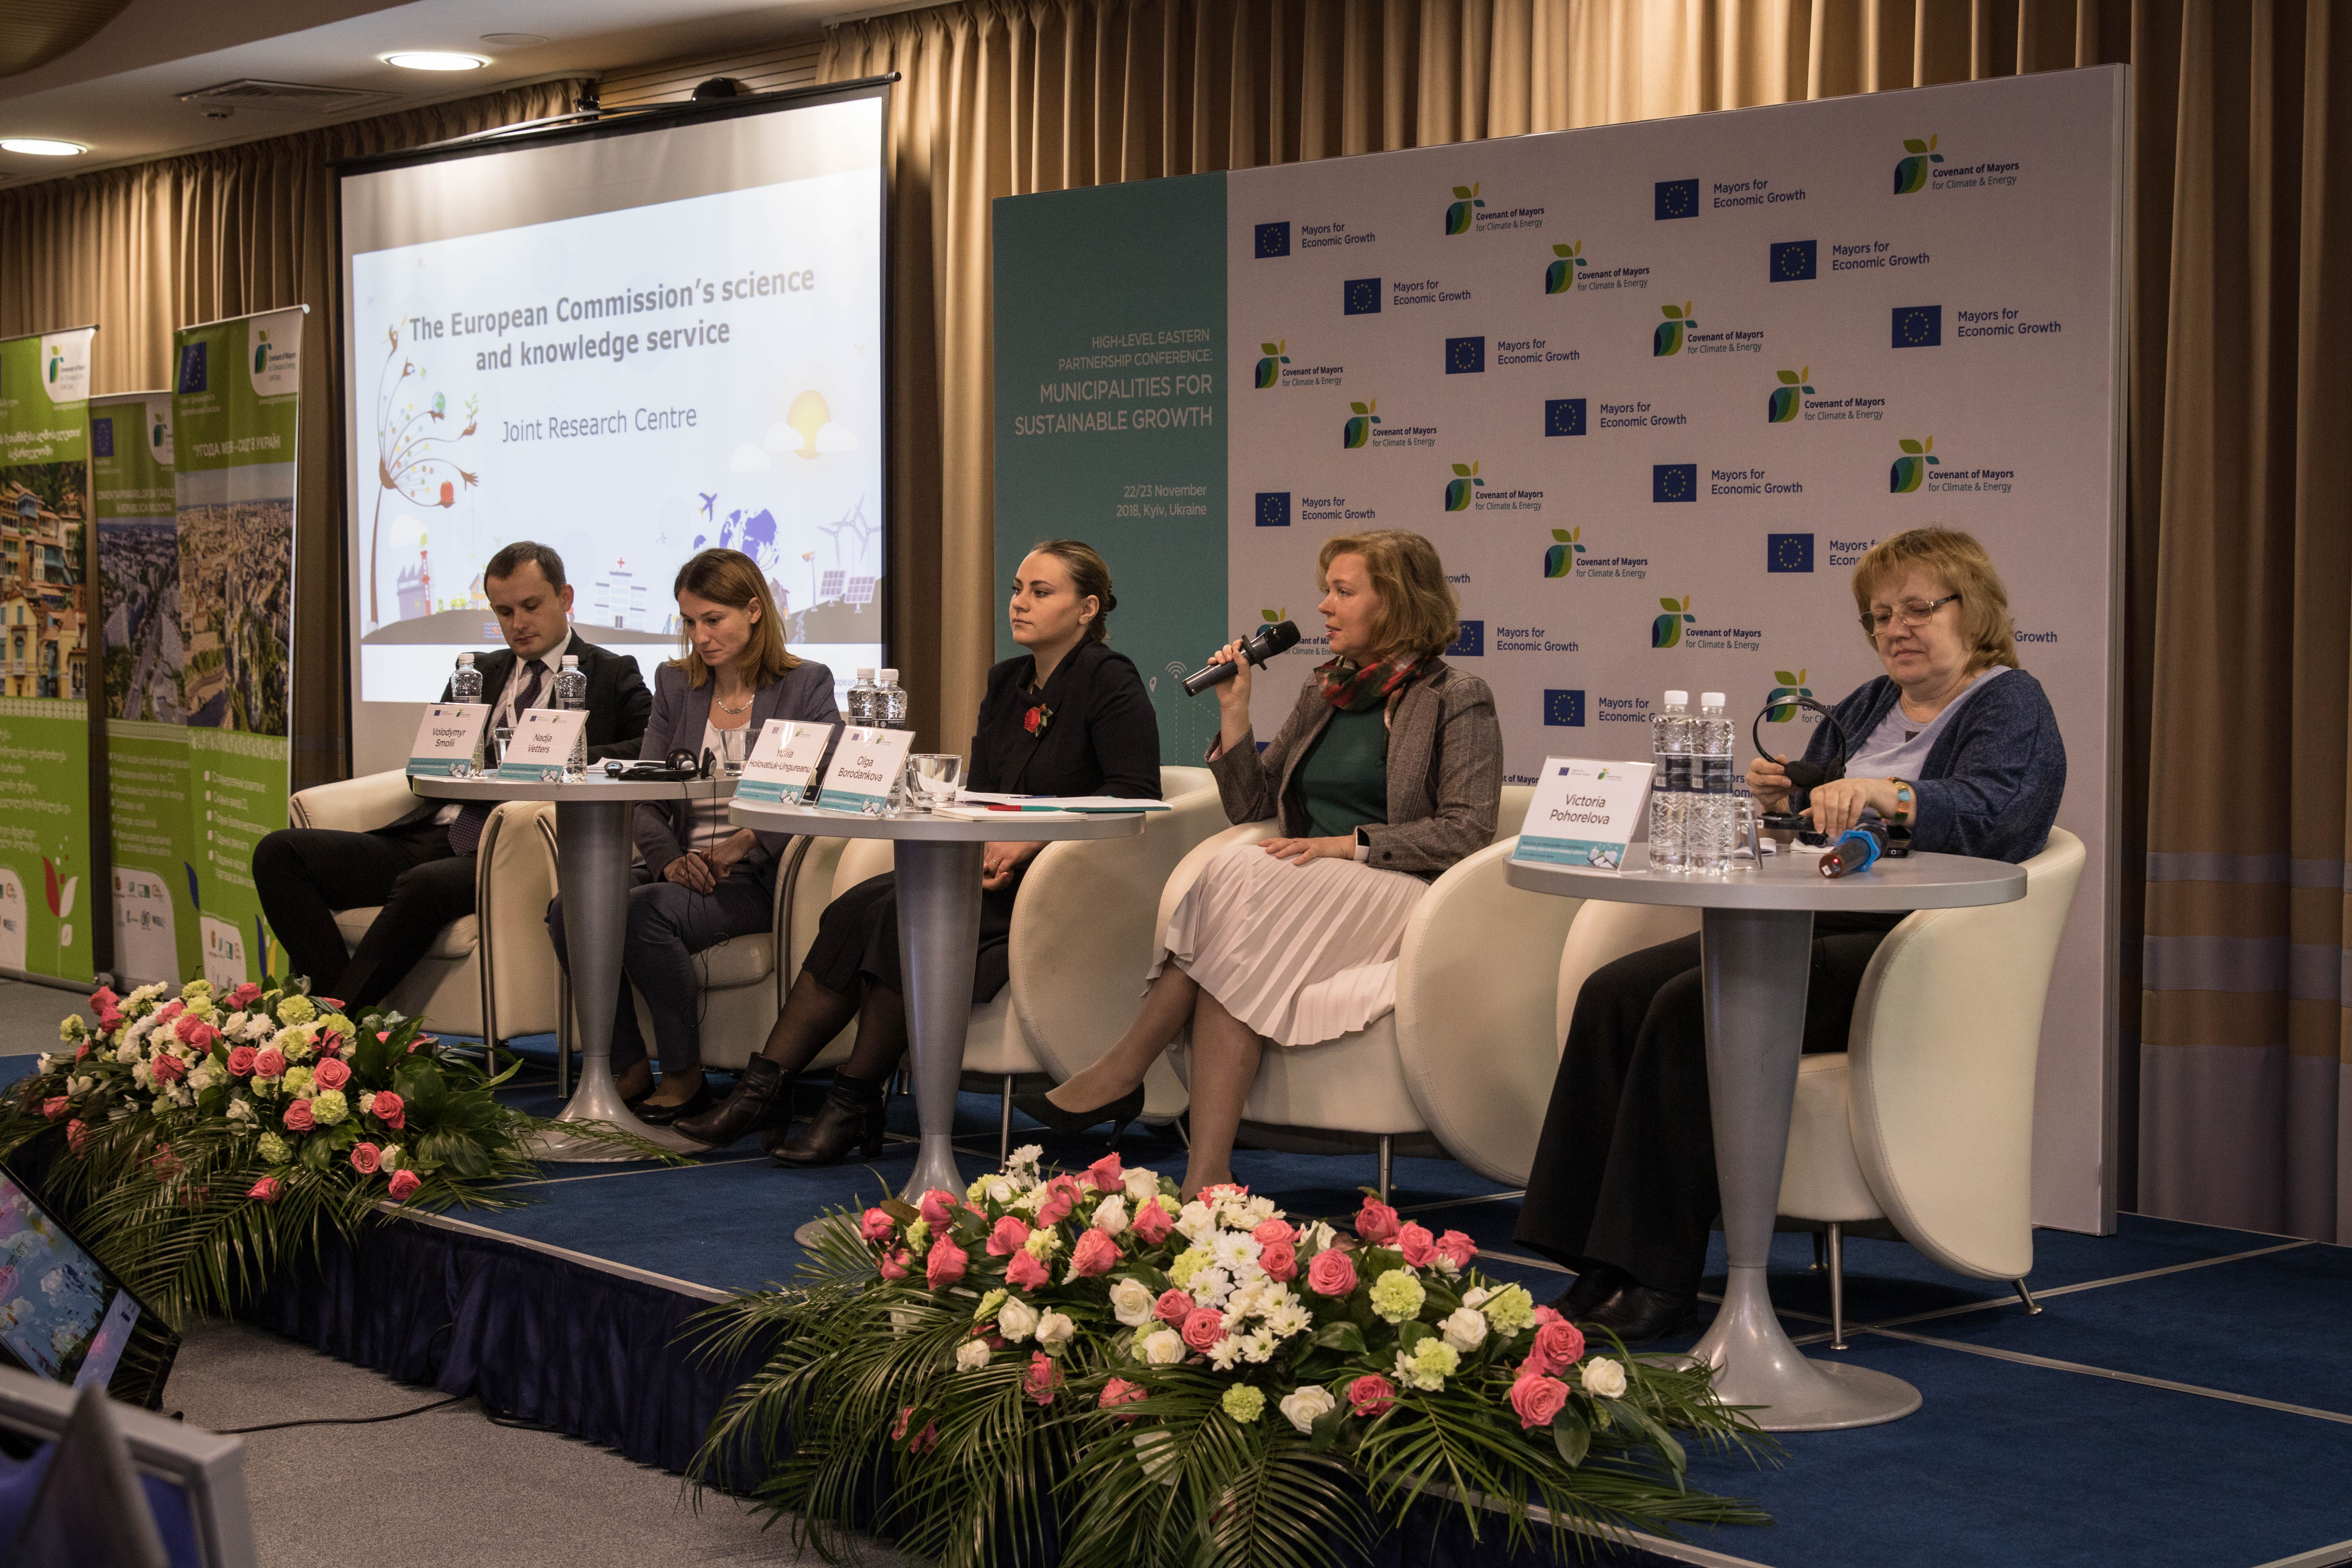 Conference "Municipalities for Sustainable Growth", Kyiv, Ukraine